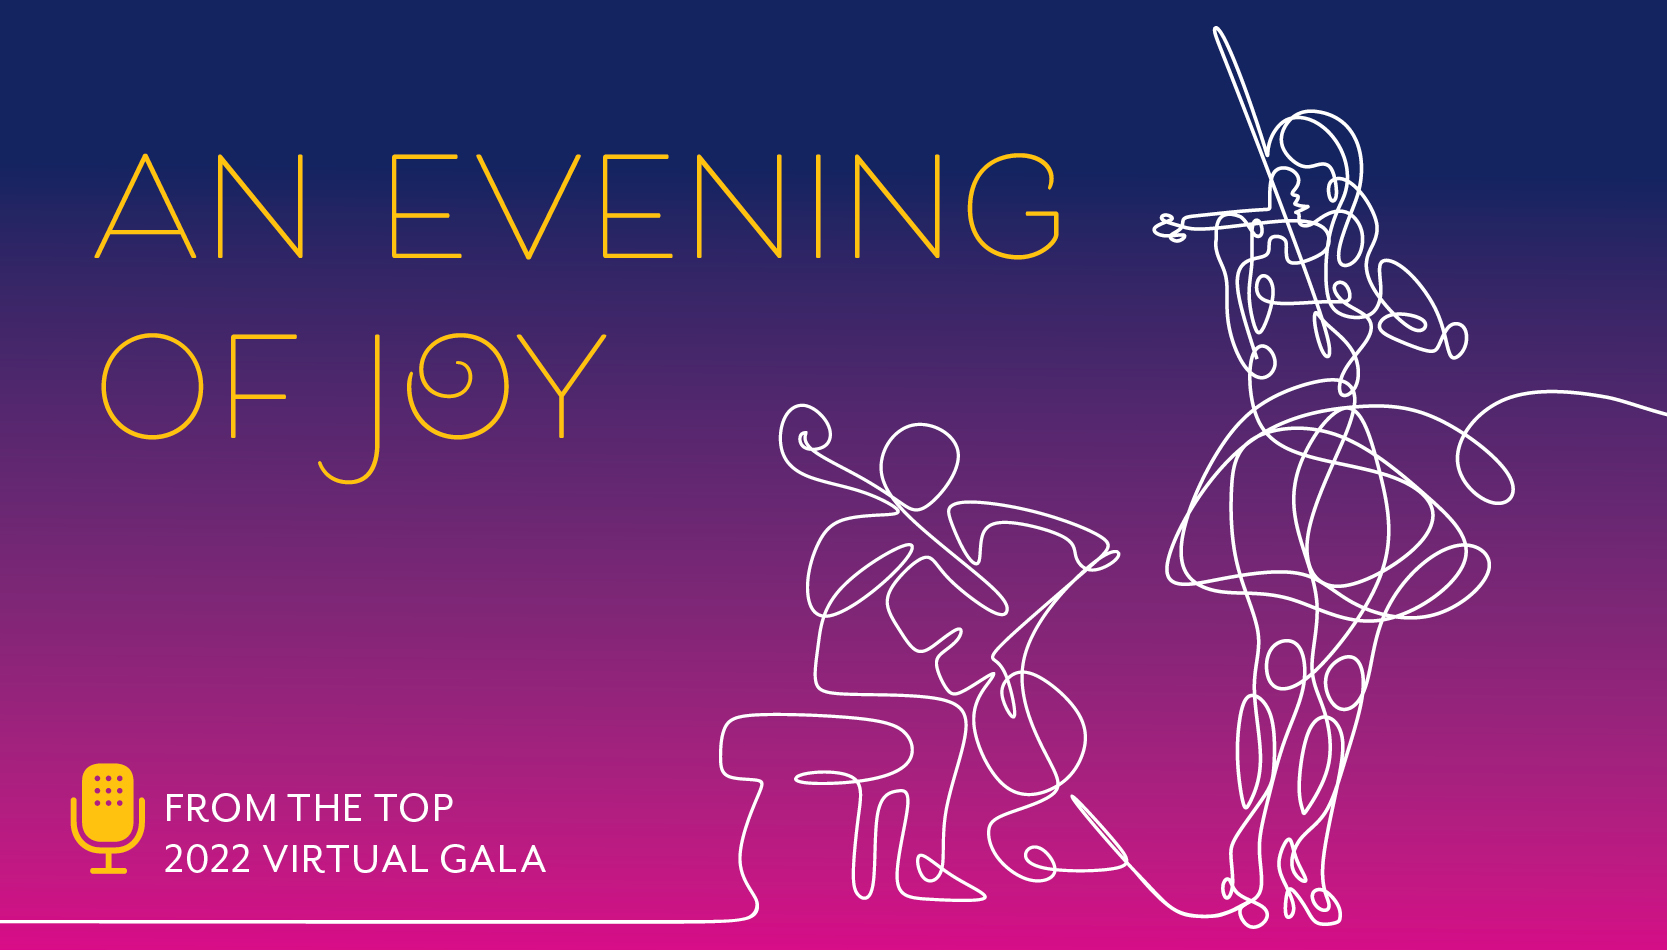 From the Top's 2022 Virtual Gala: An Evening of Joy